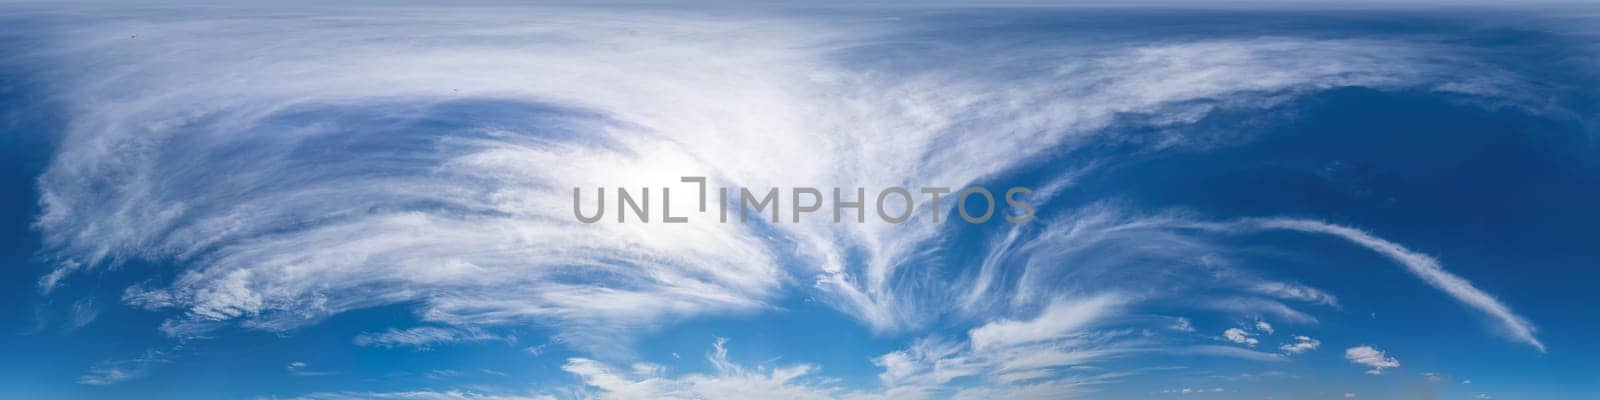 Sky dome panorama with clouds, no ground, suitable for easy use in 3D graphics and composite aerial and ground panoramas, seamless and perfect for sky replacement.